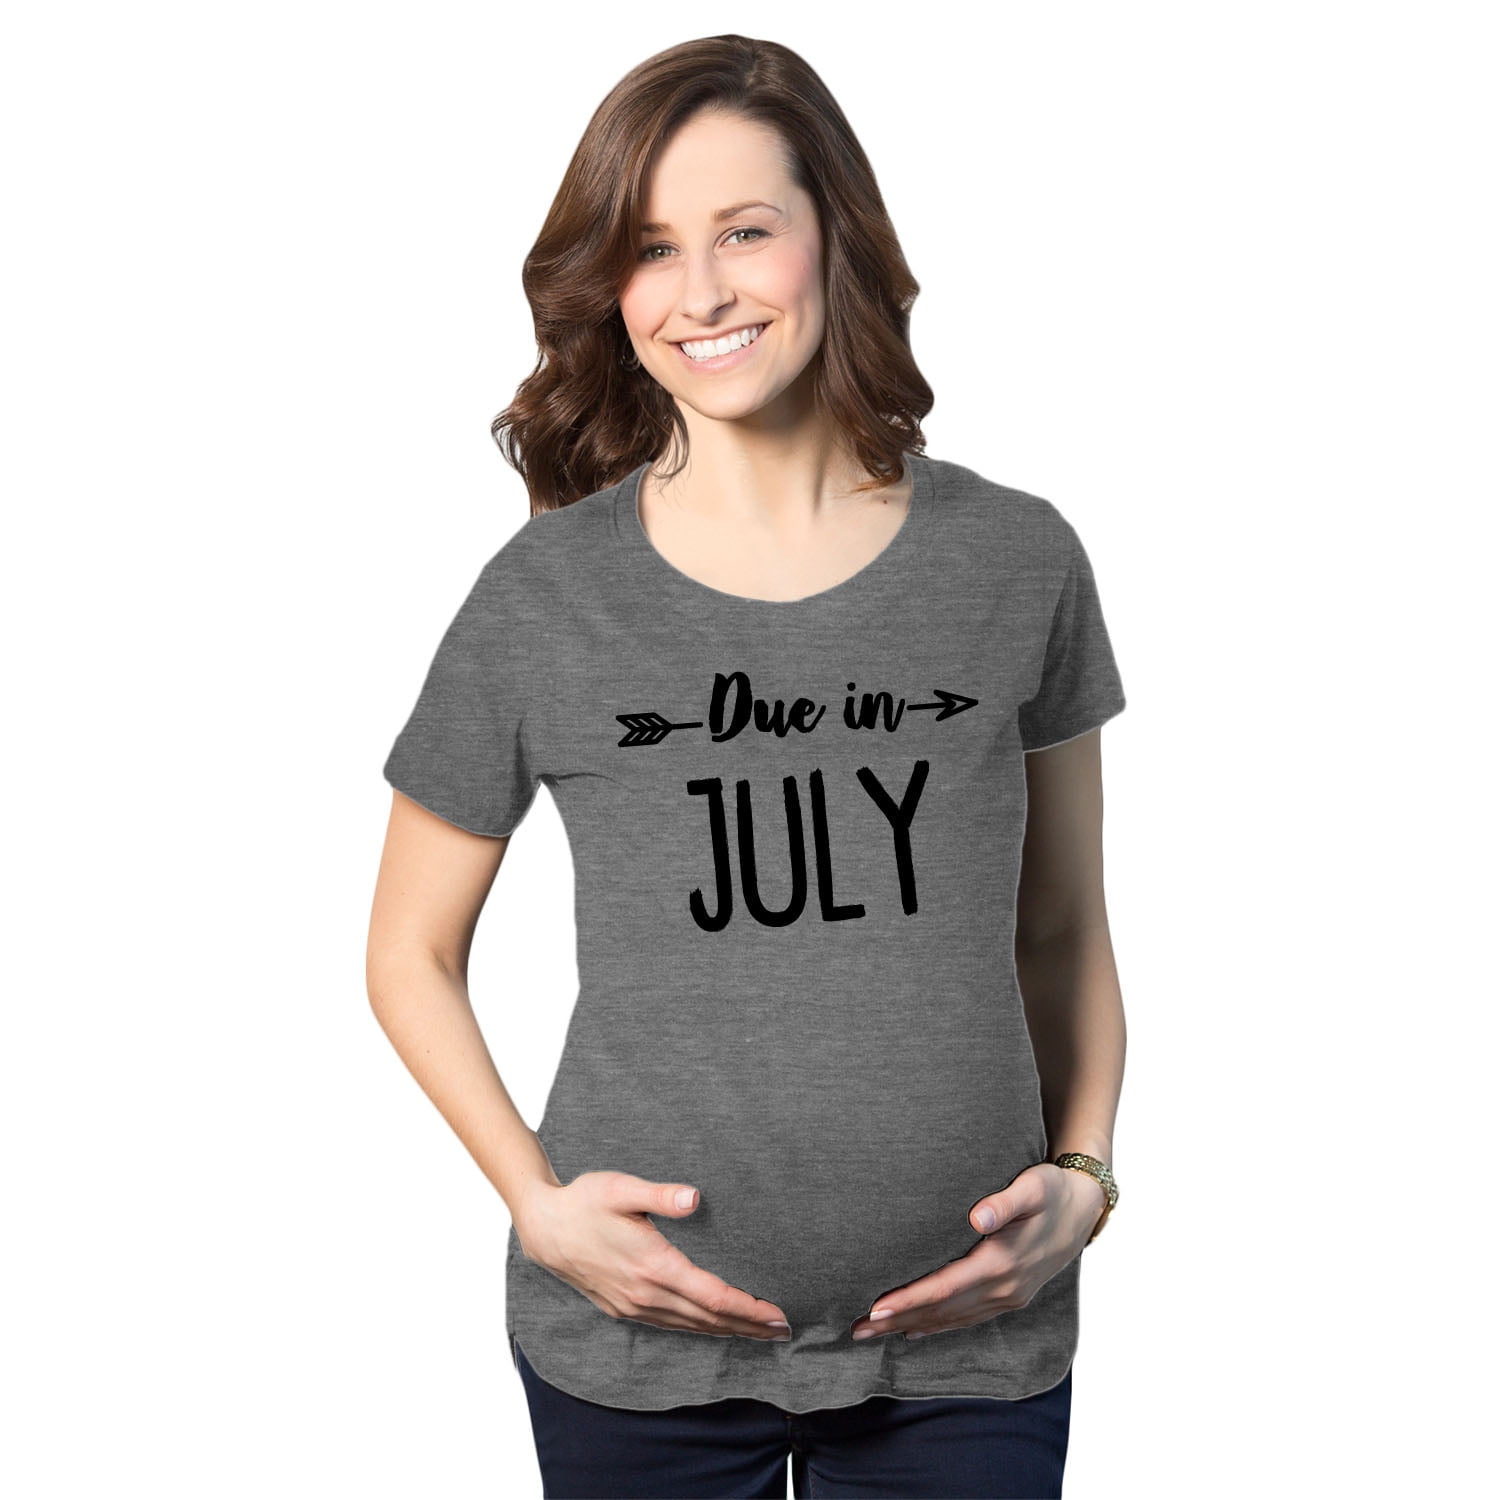 Pregnancy T-shirt Funny Maternity T-shirt With Sayings Birth